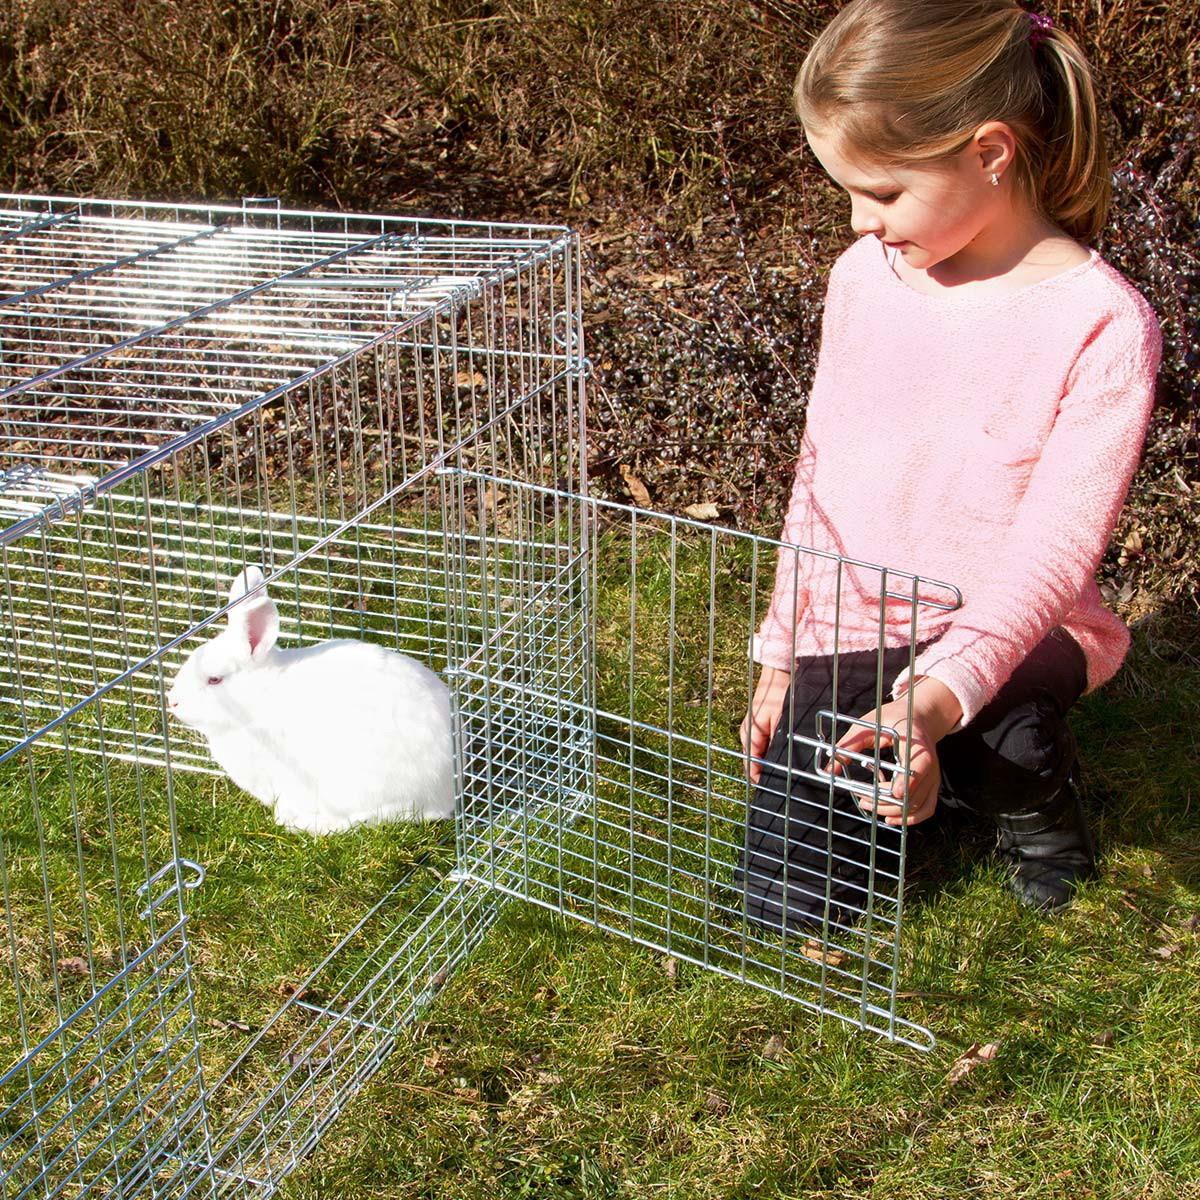 Outdoor Enclosure for Young Animals 144x112x60cm